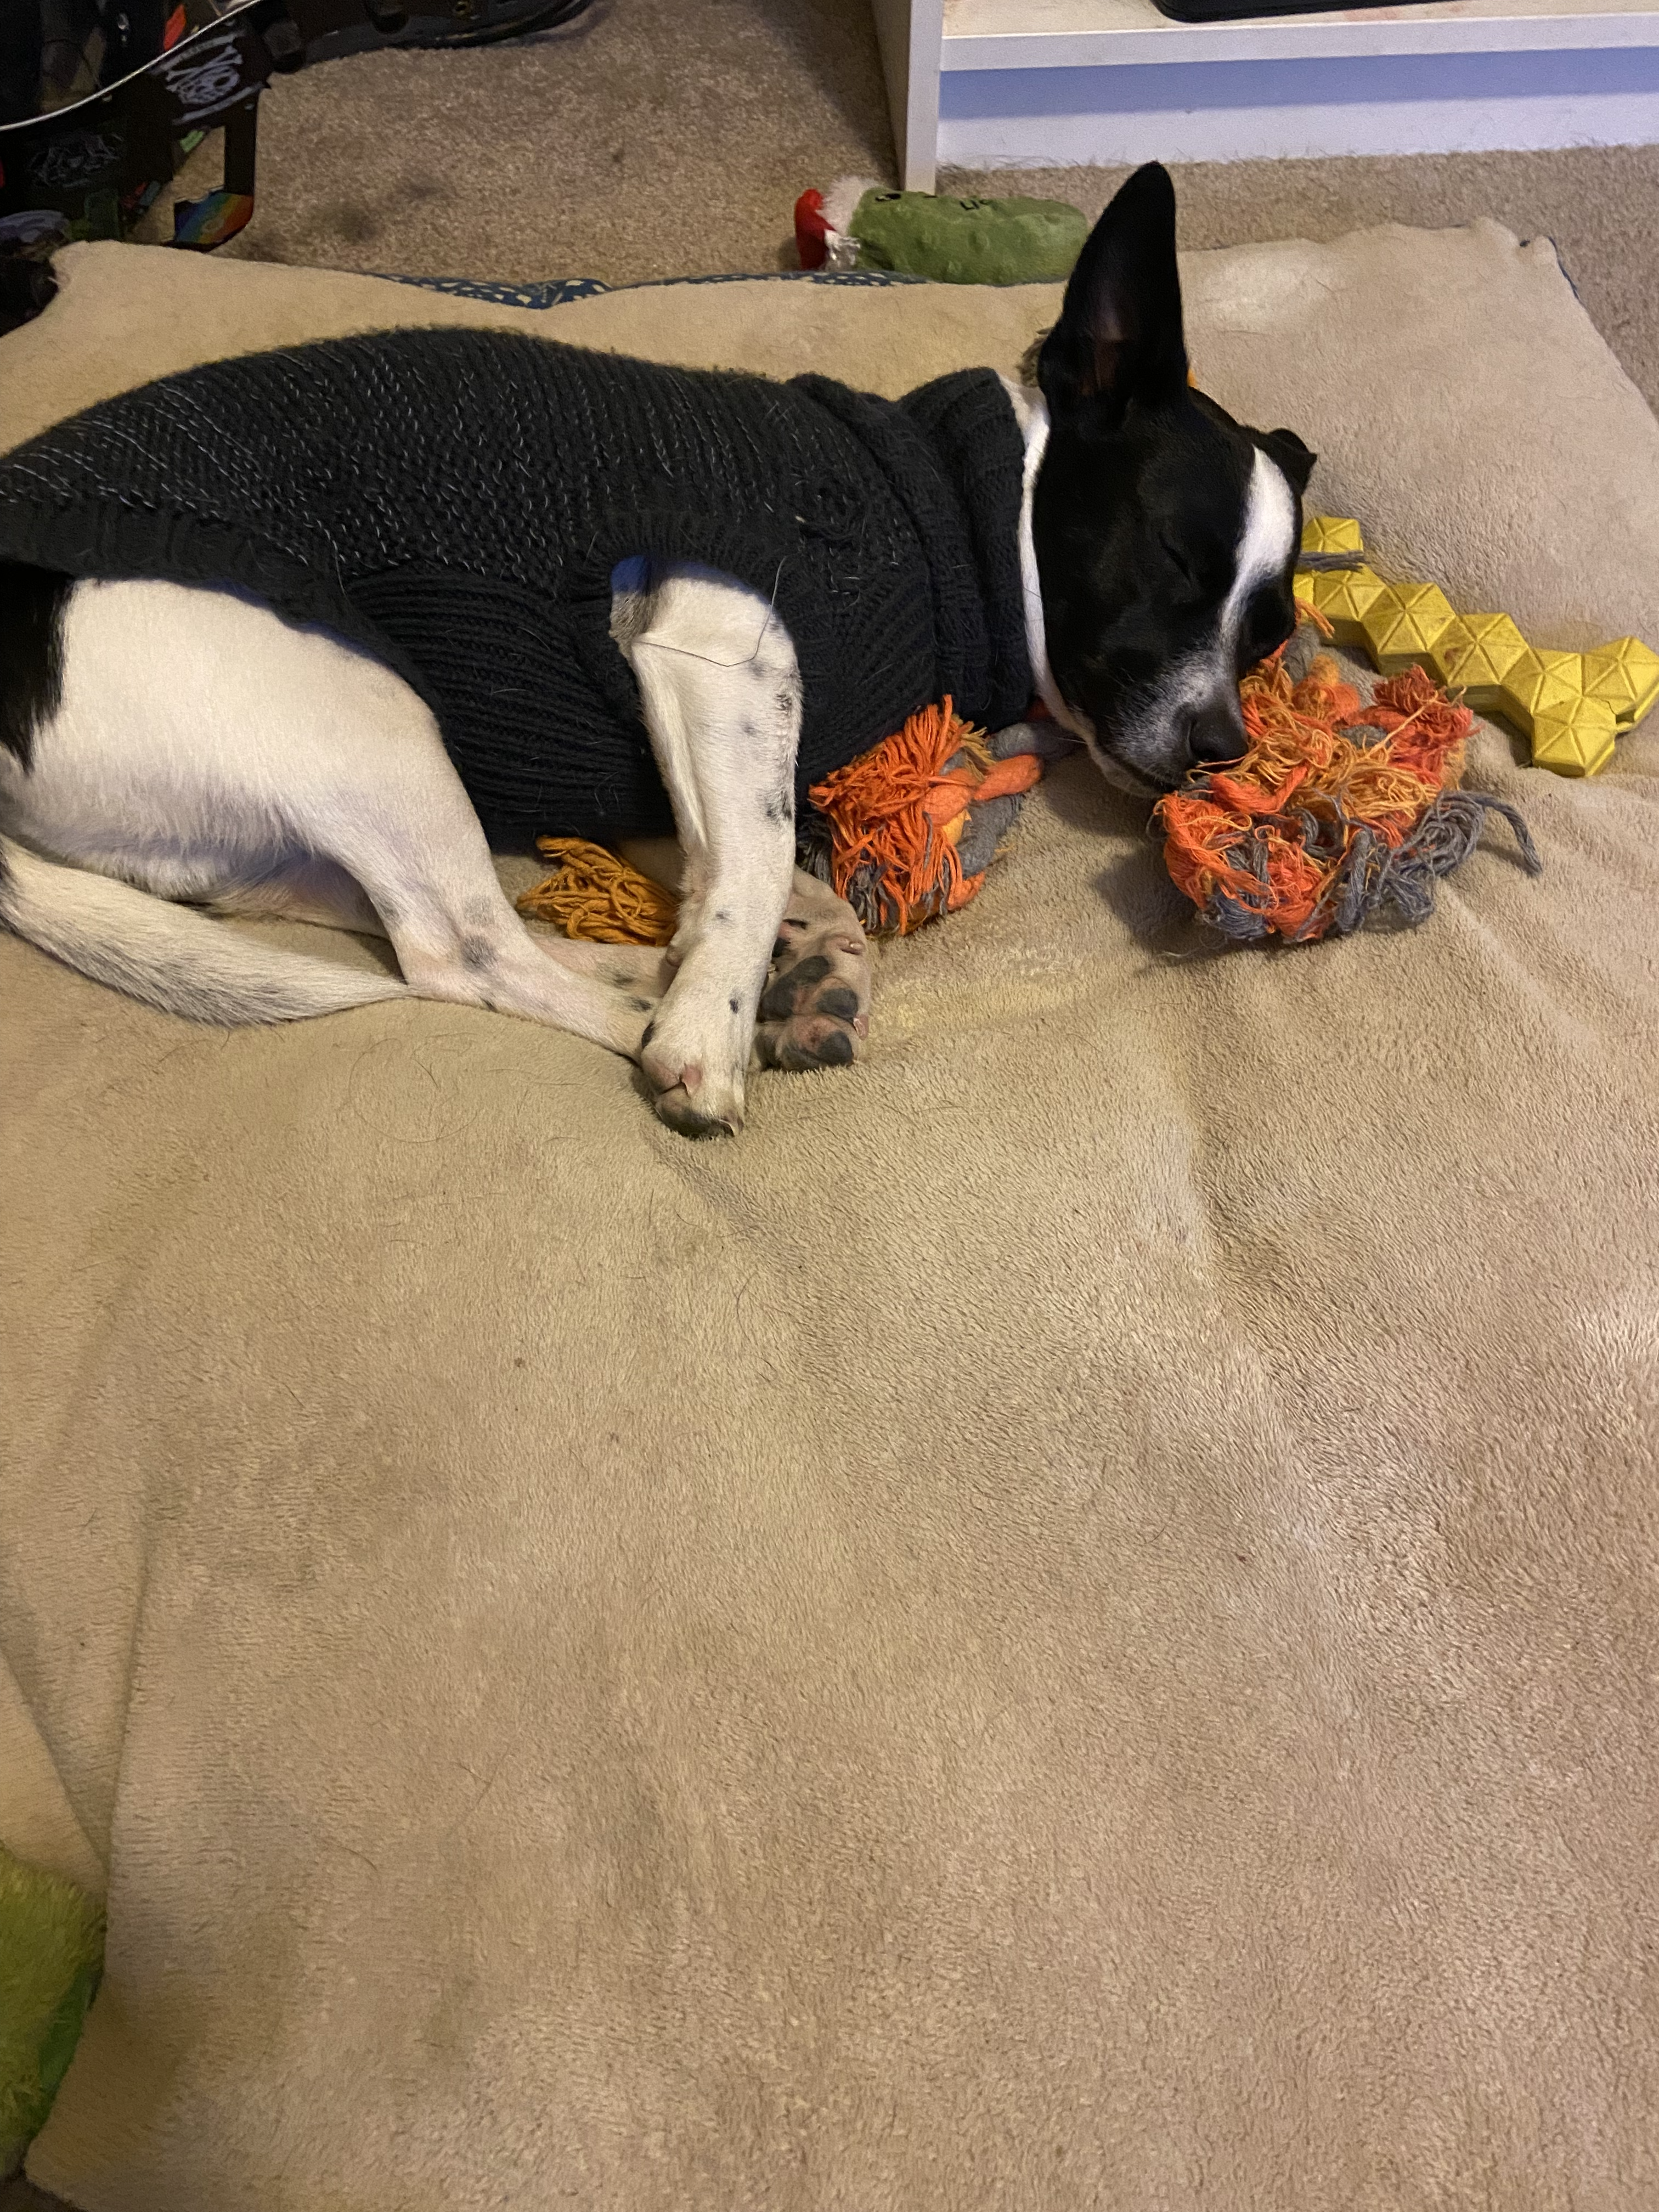 Black and white dog wearing a sweater, sleeping, facing the camera